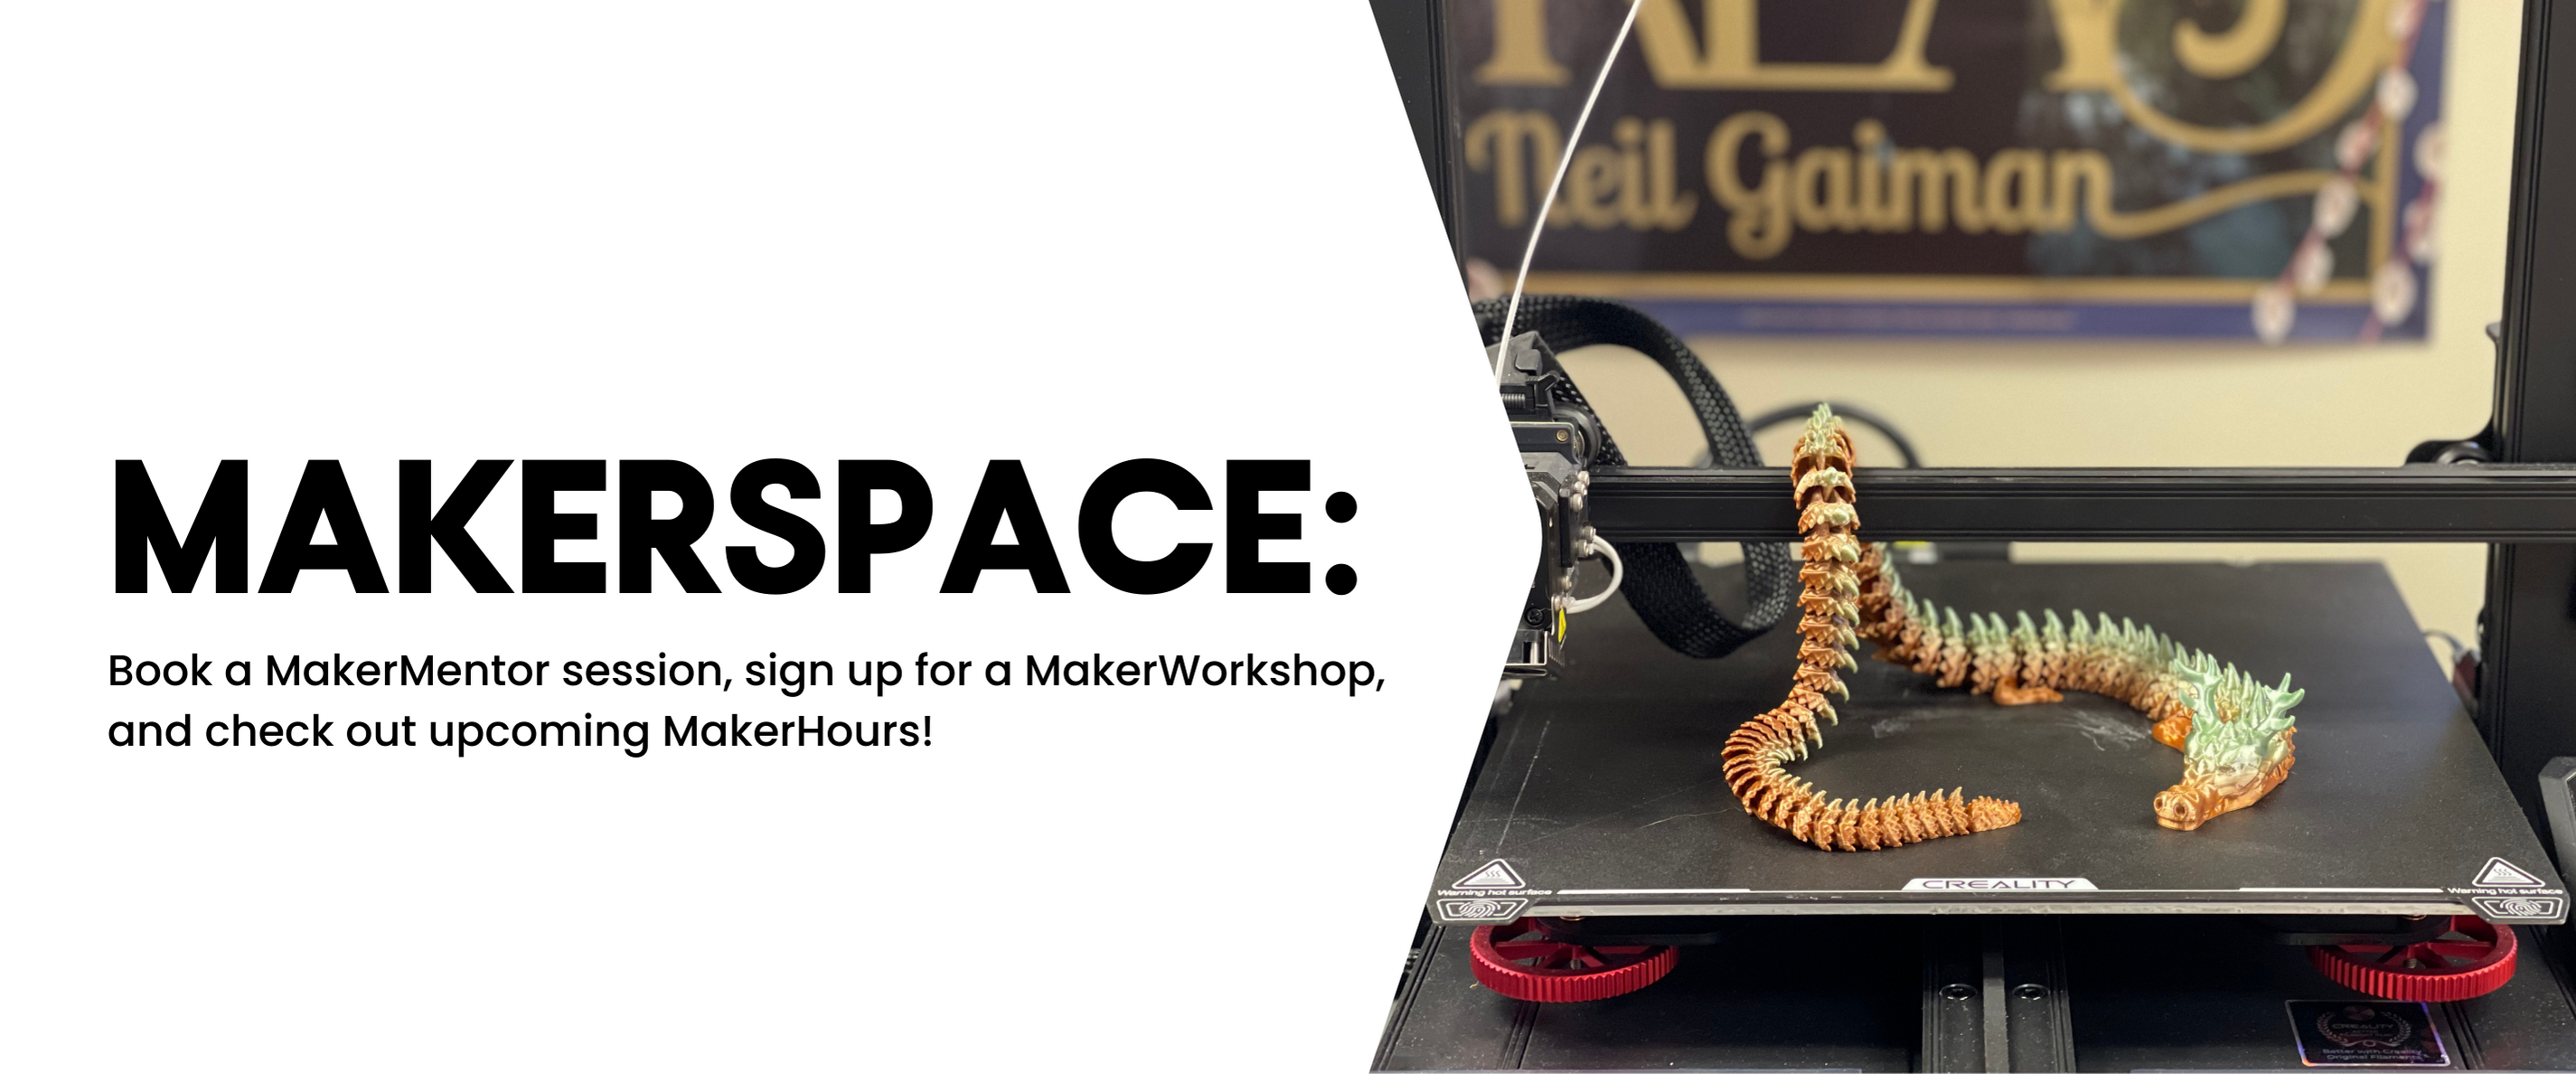 Text reads, "Makerspace: Book a MakerMentor session, sign up for a MakerWorkshop, and check out upcoming MakerHours!"